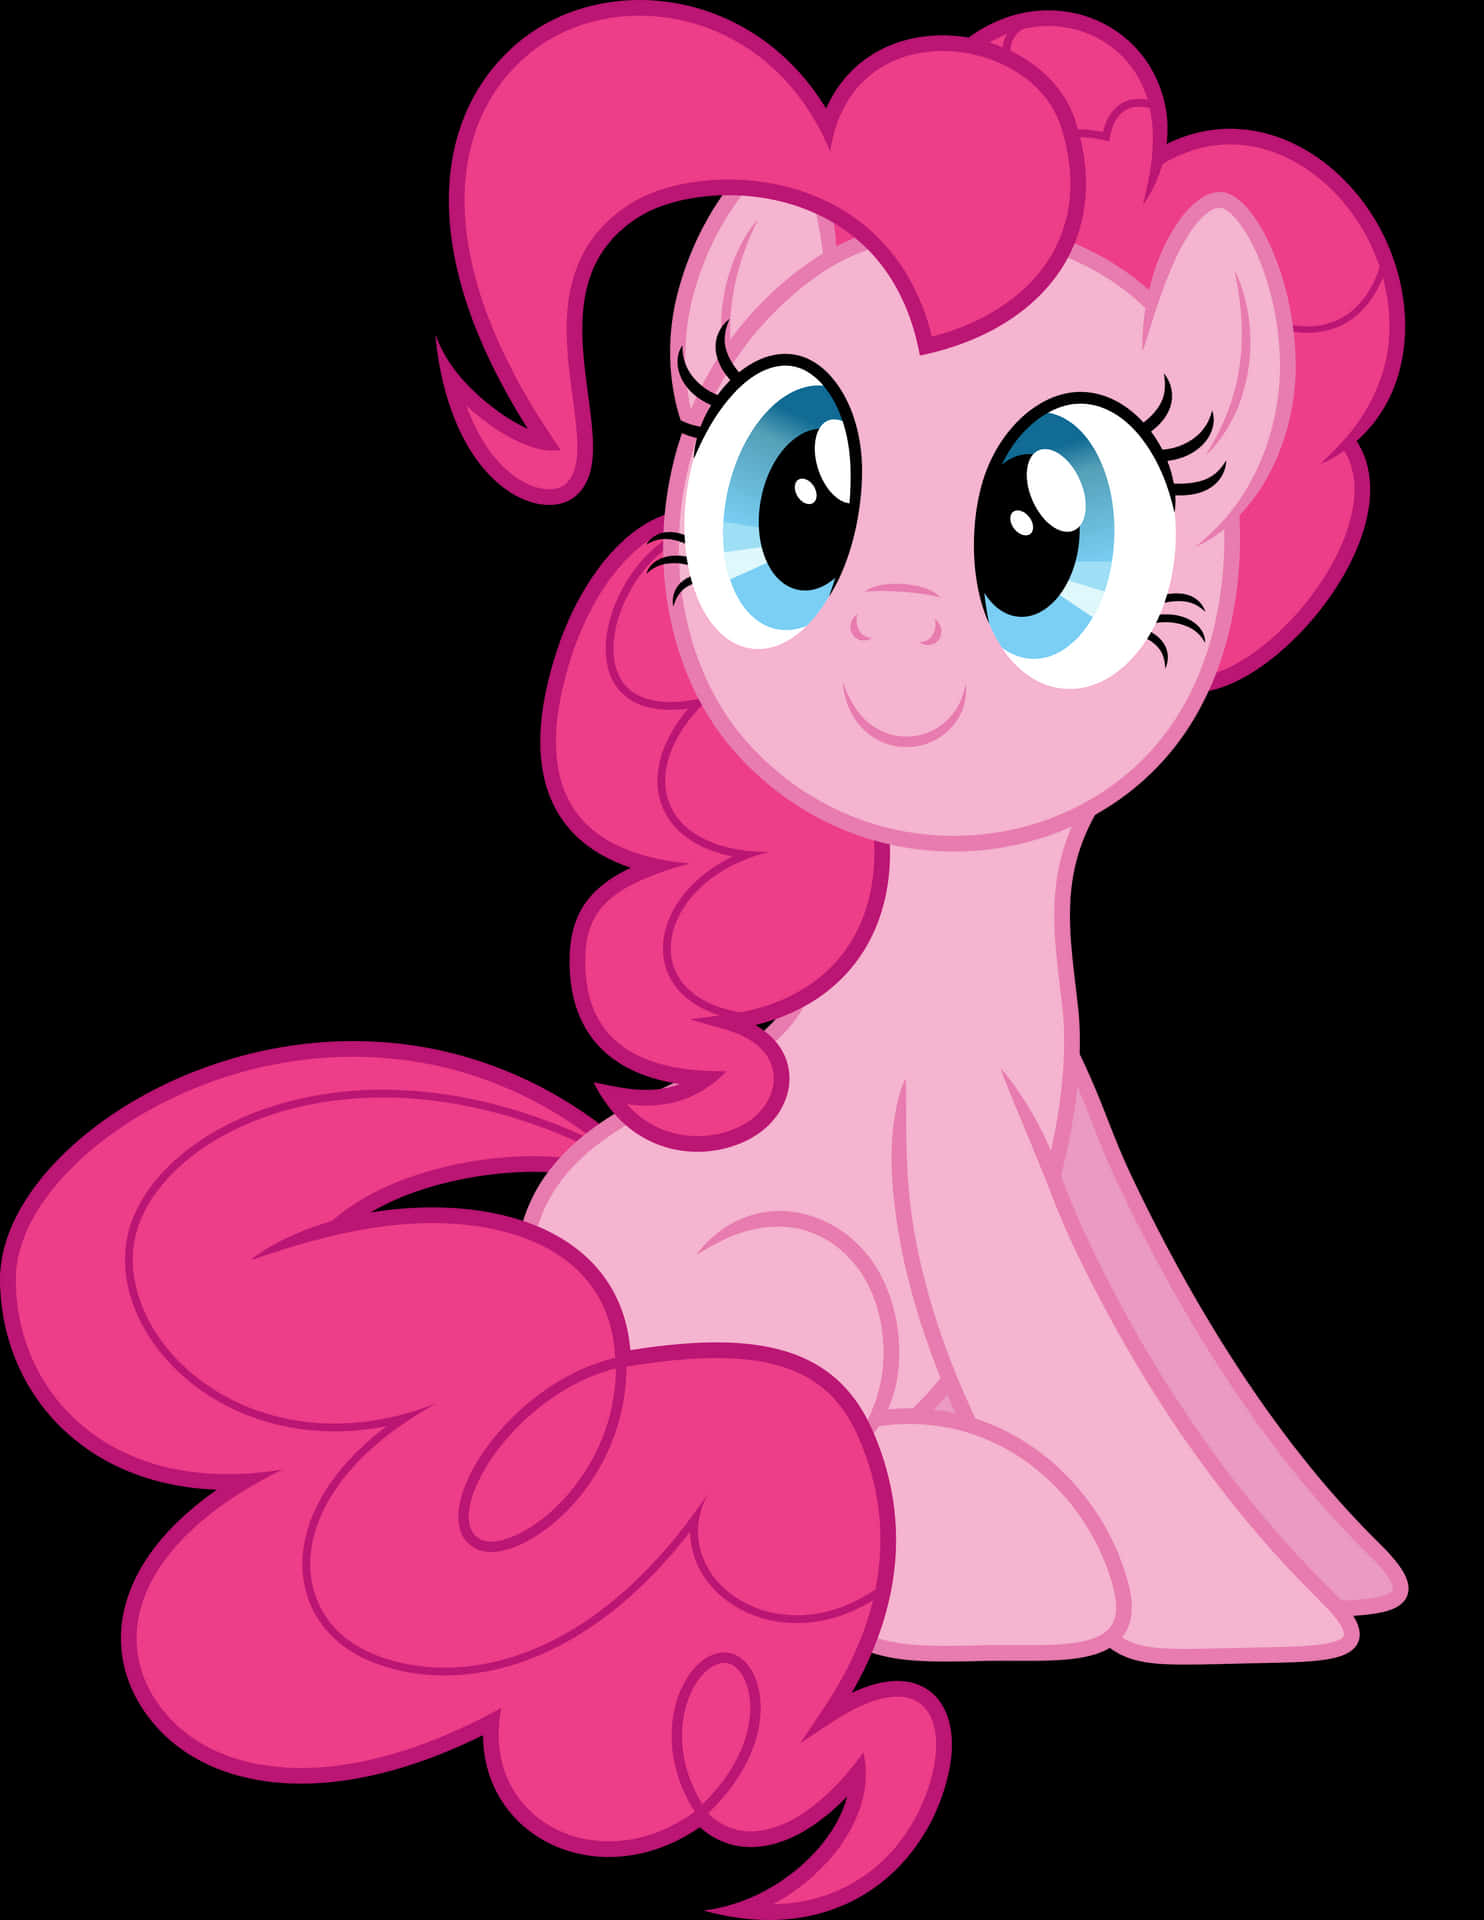 Pinkie Pie is full of joy and laughter!